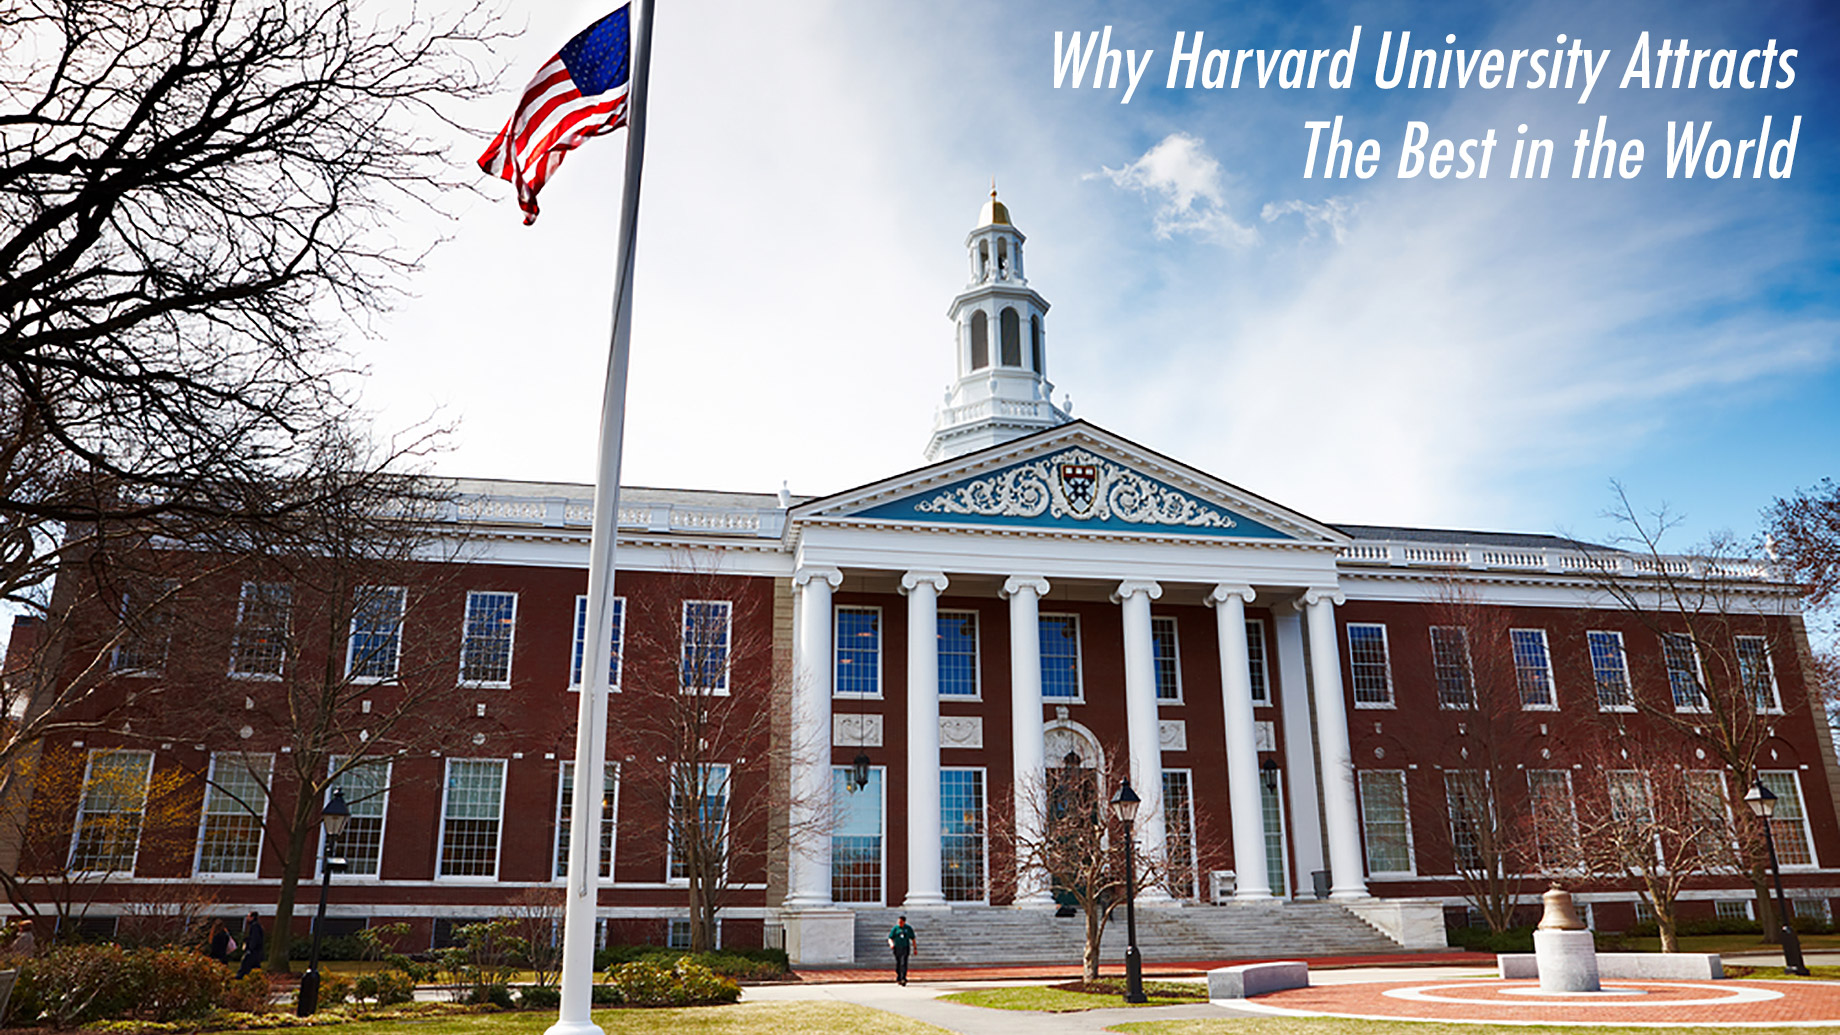 Why Harvard University Attracts The Best in the World